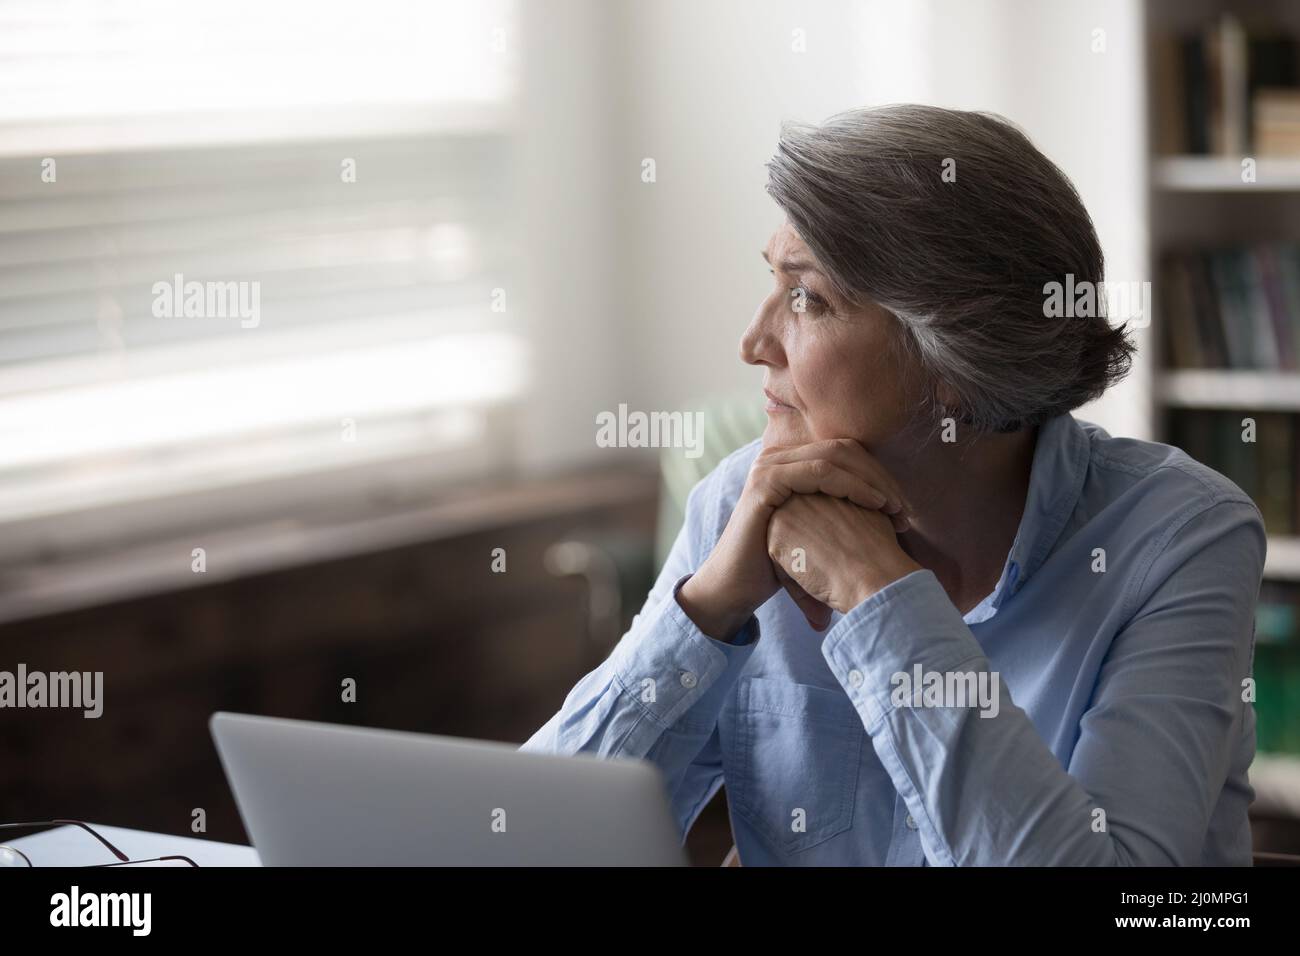 Serious pensive older businesswoman distracted from work staring out window Stock Photo